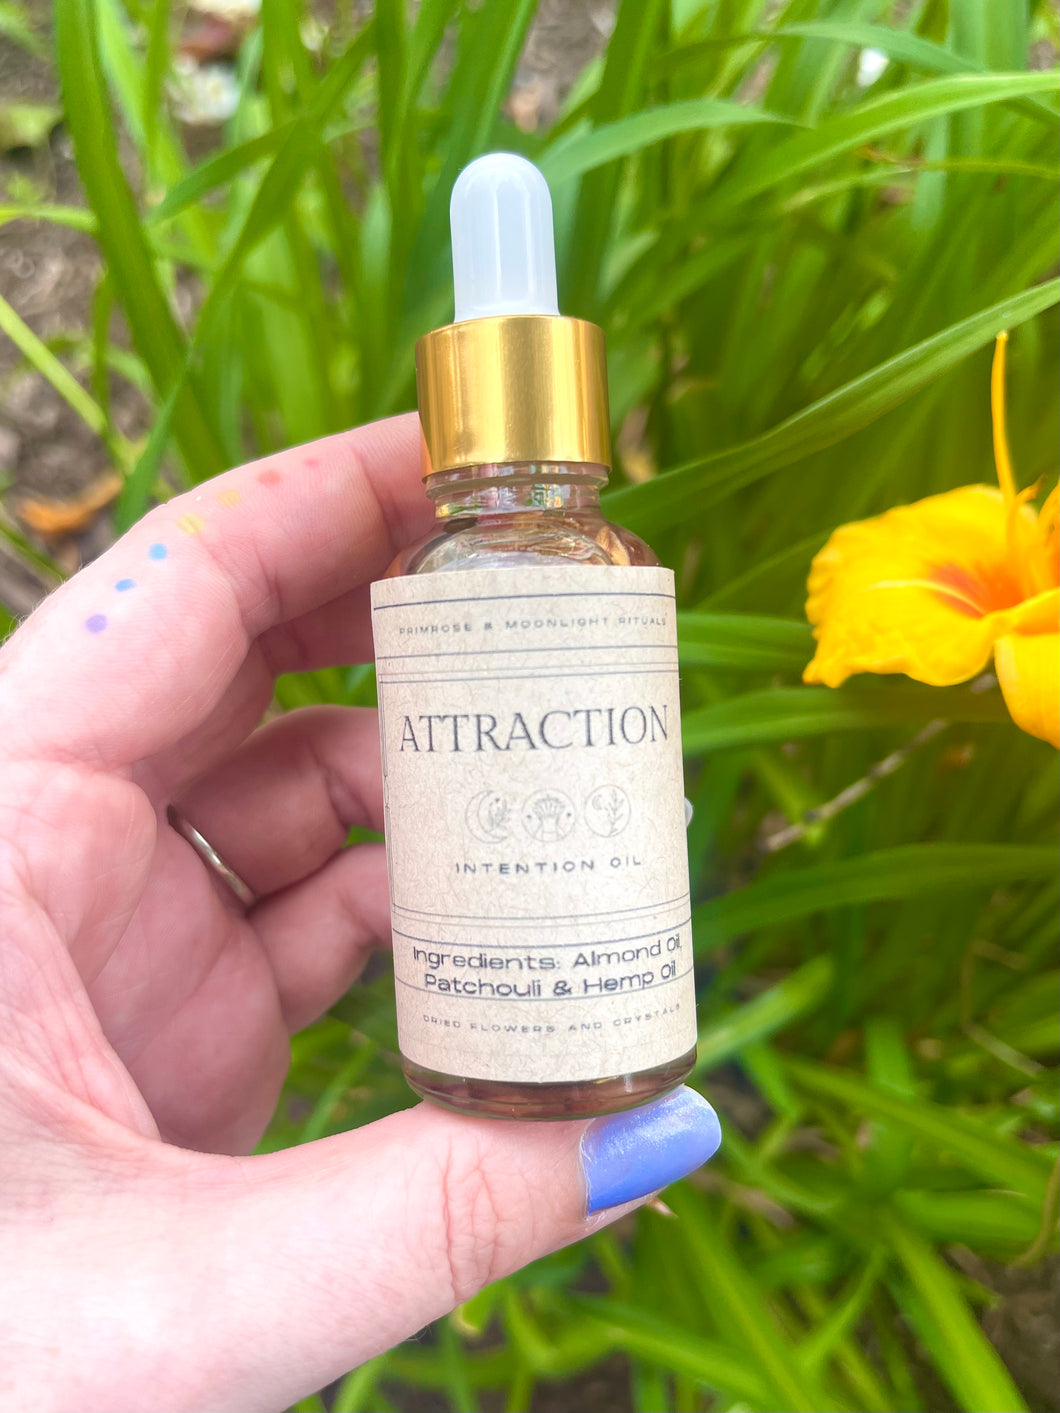 Attraction - Intention Oil